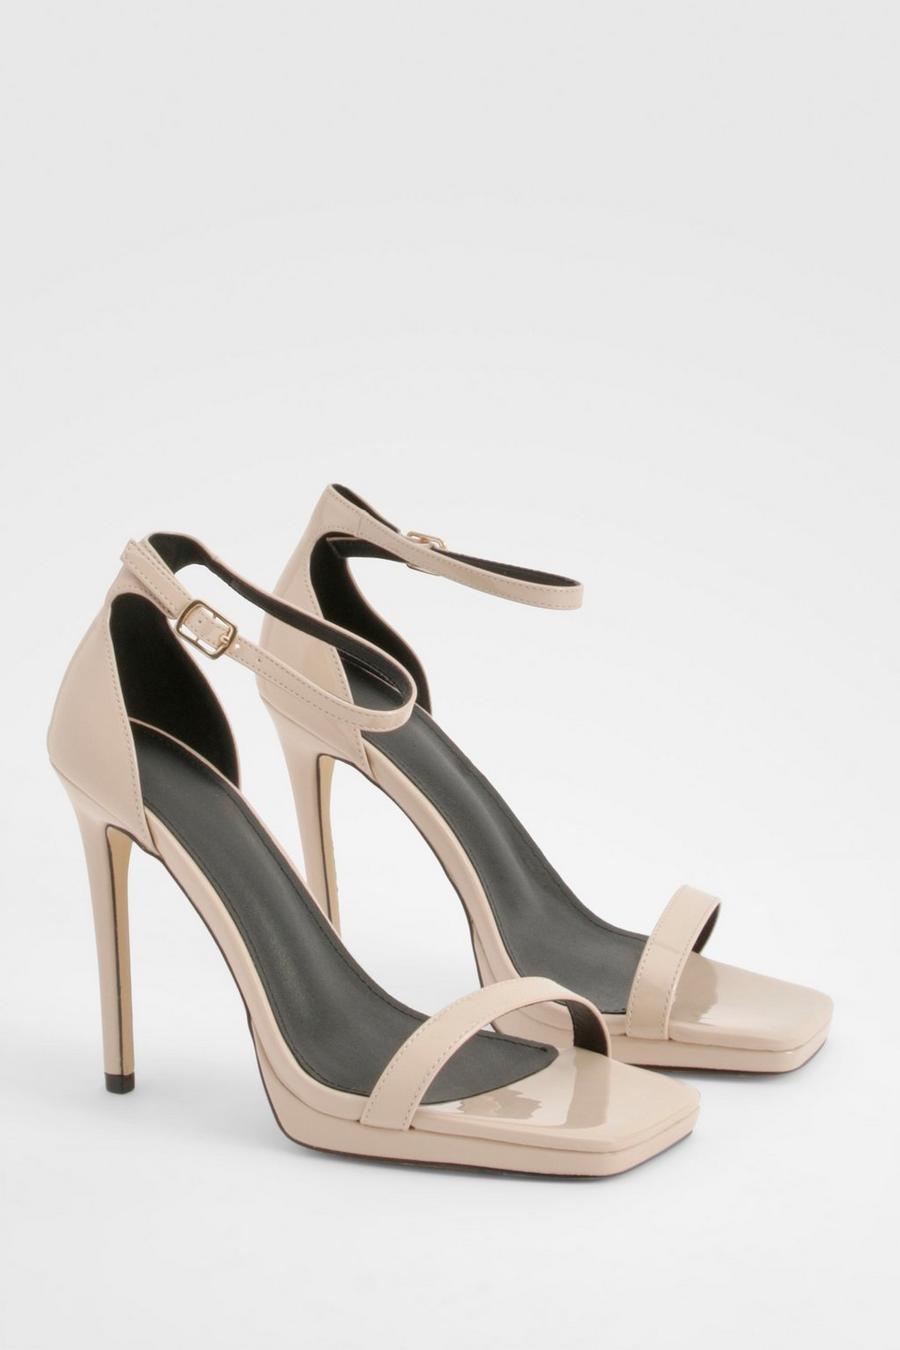 Nude Barely There 2 Part Heel